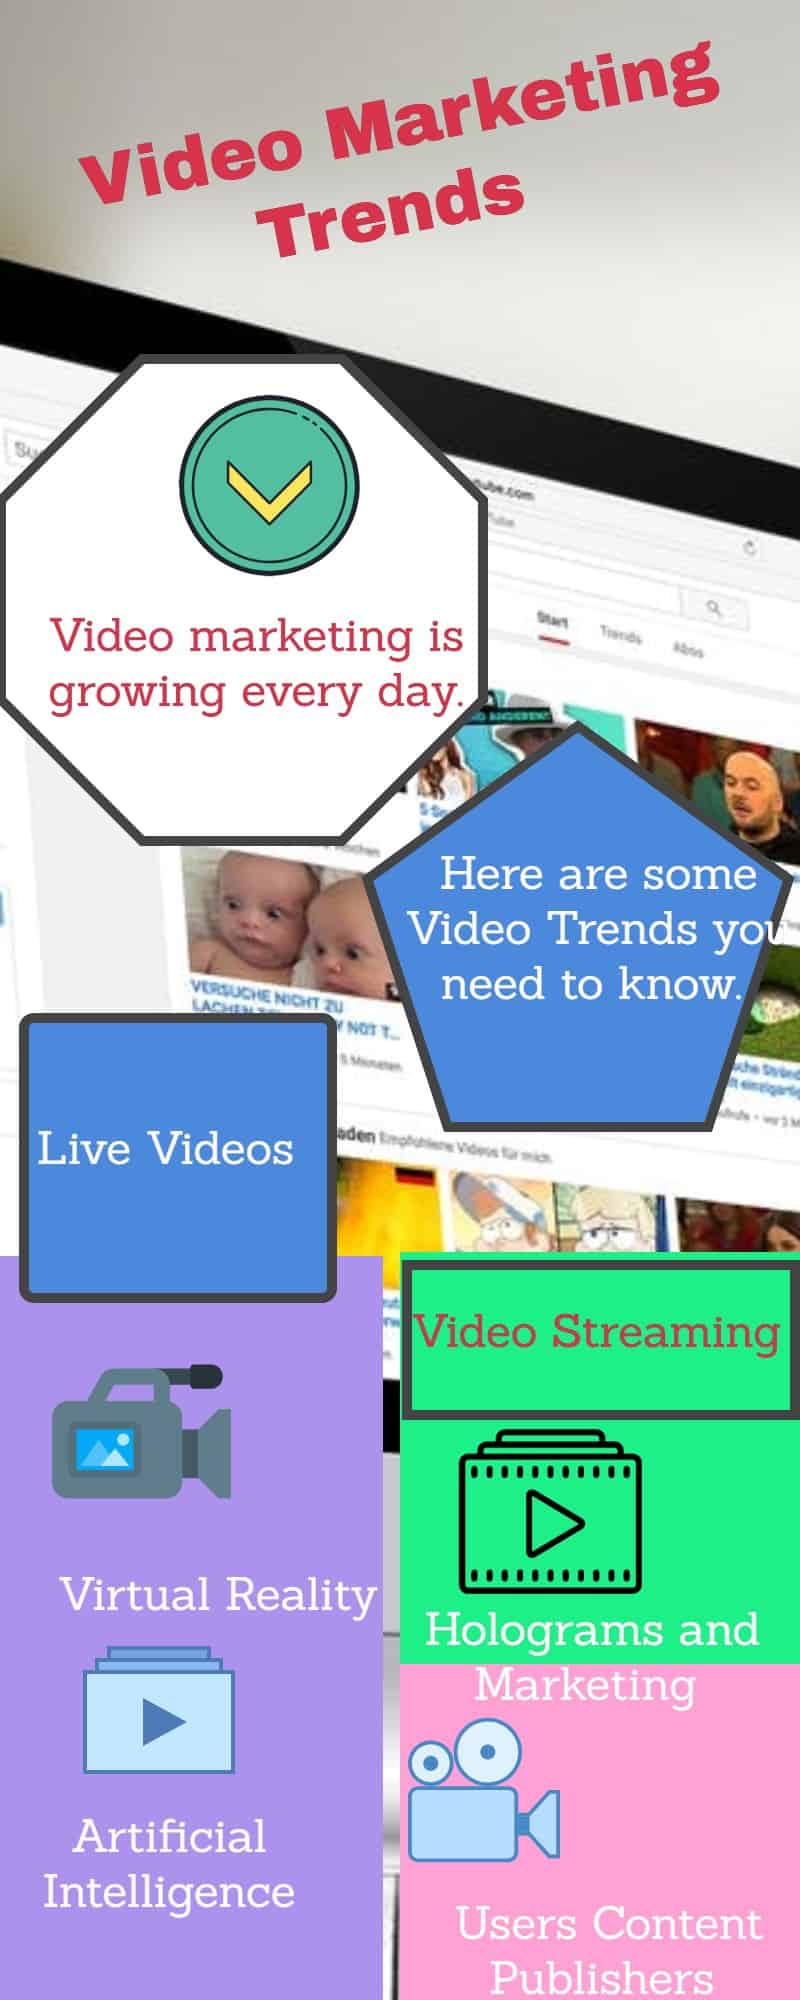 Video Marketing Trends: How To Create Effective Videos for Your Business